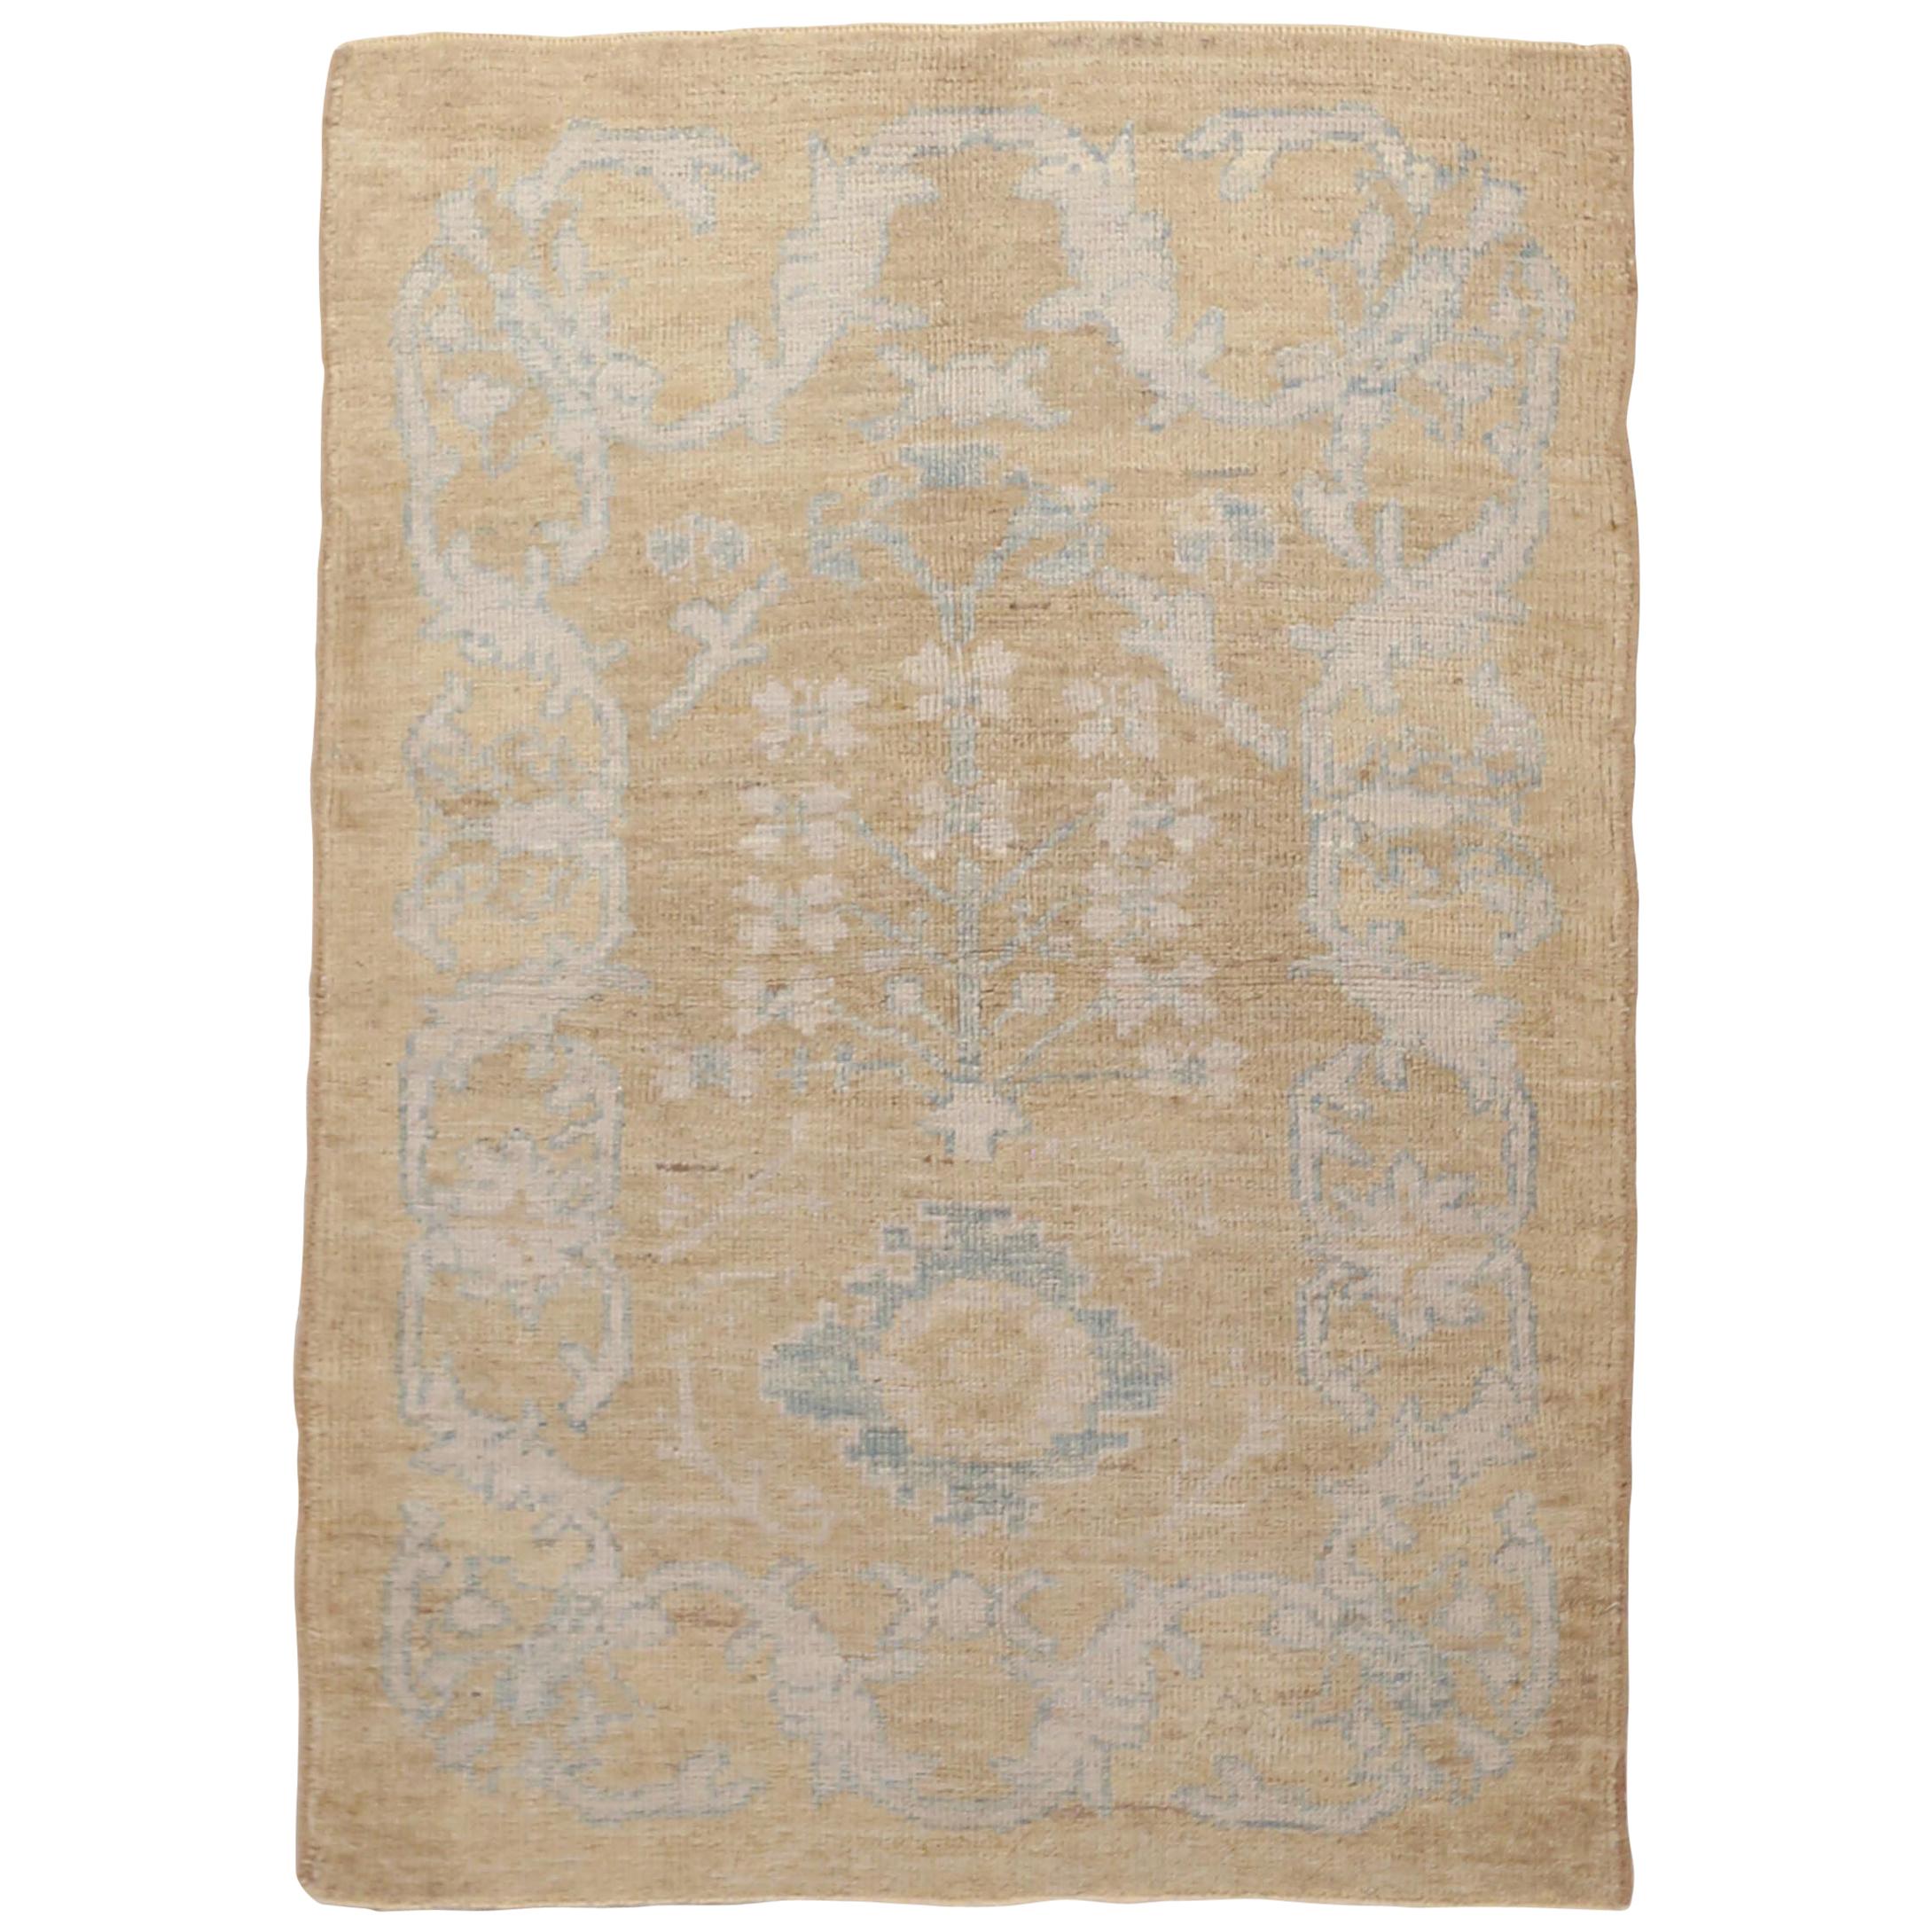 Contemporary Oushak Persian Rug with Ivory Floral Patterns 